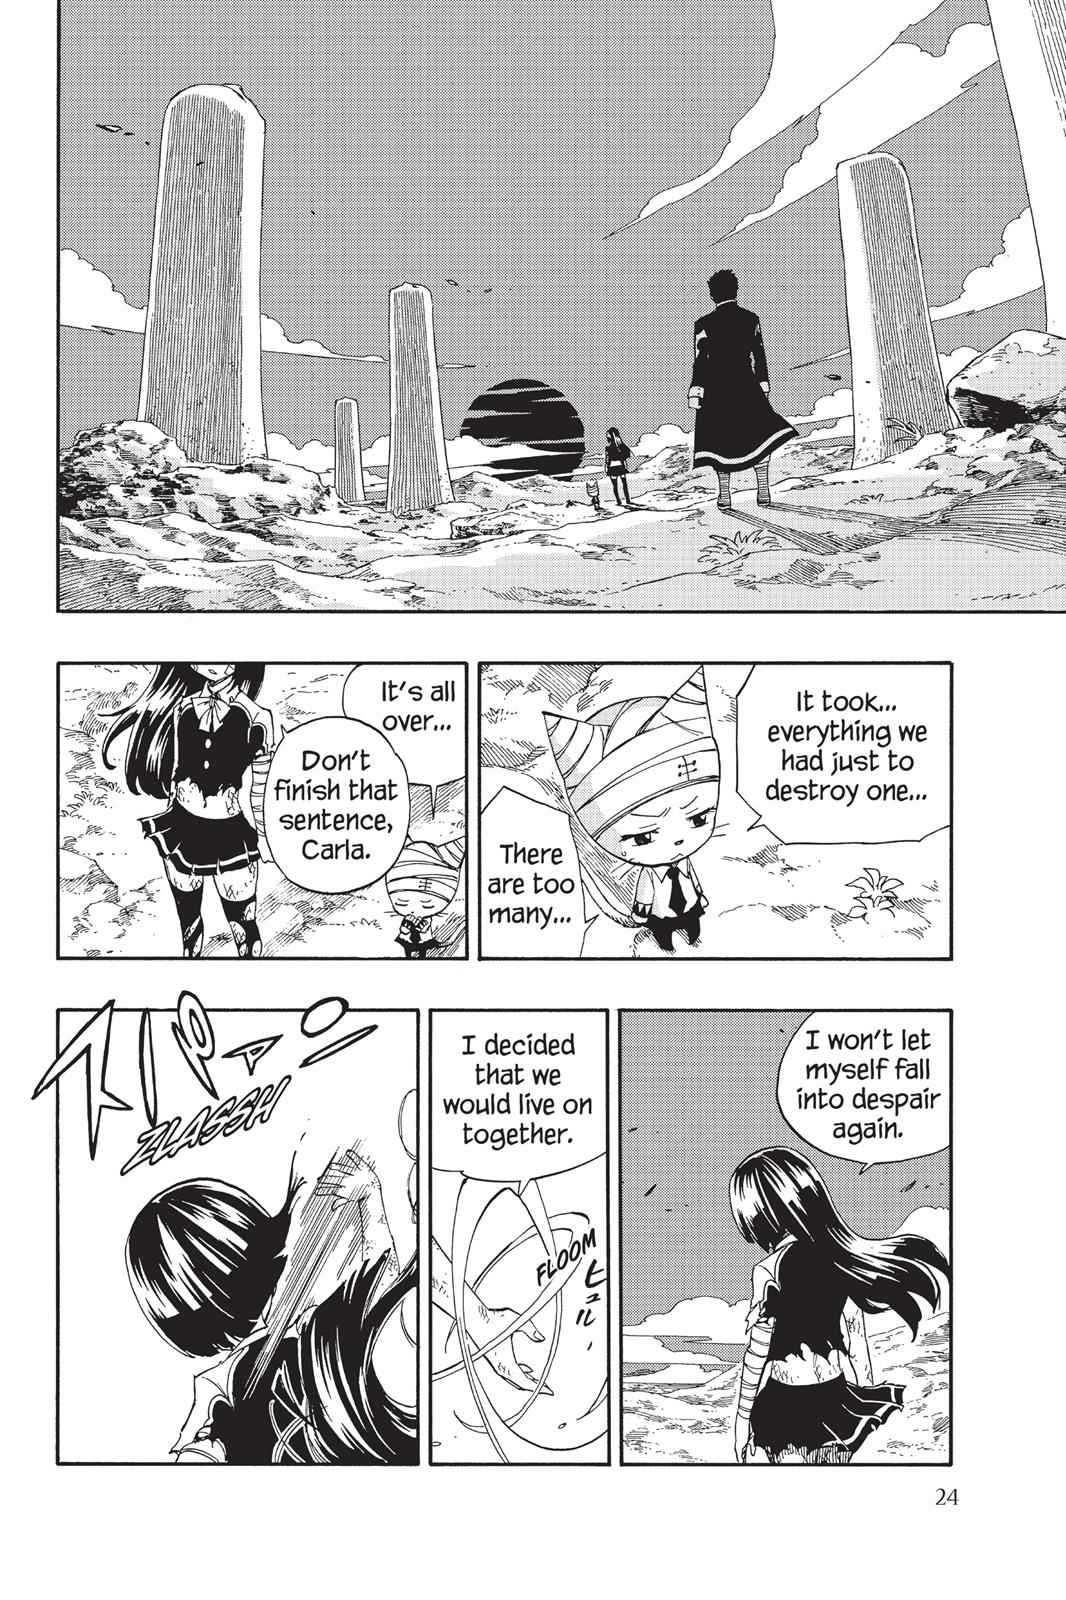  Chapter 388 image 002